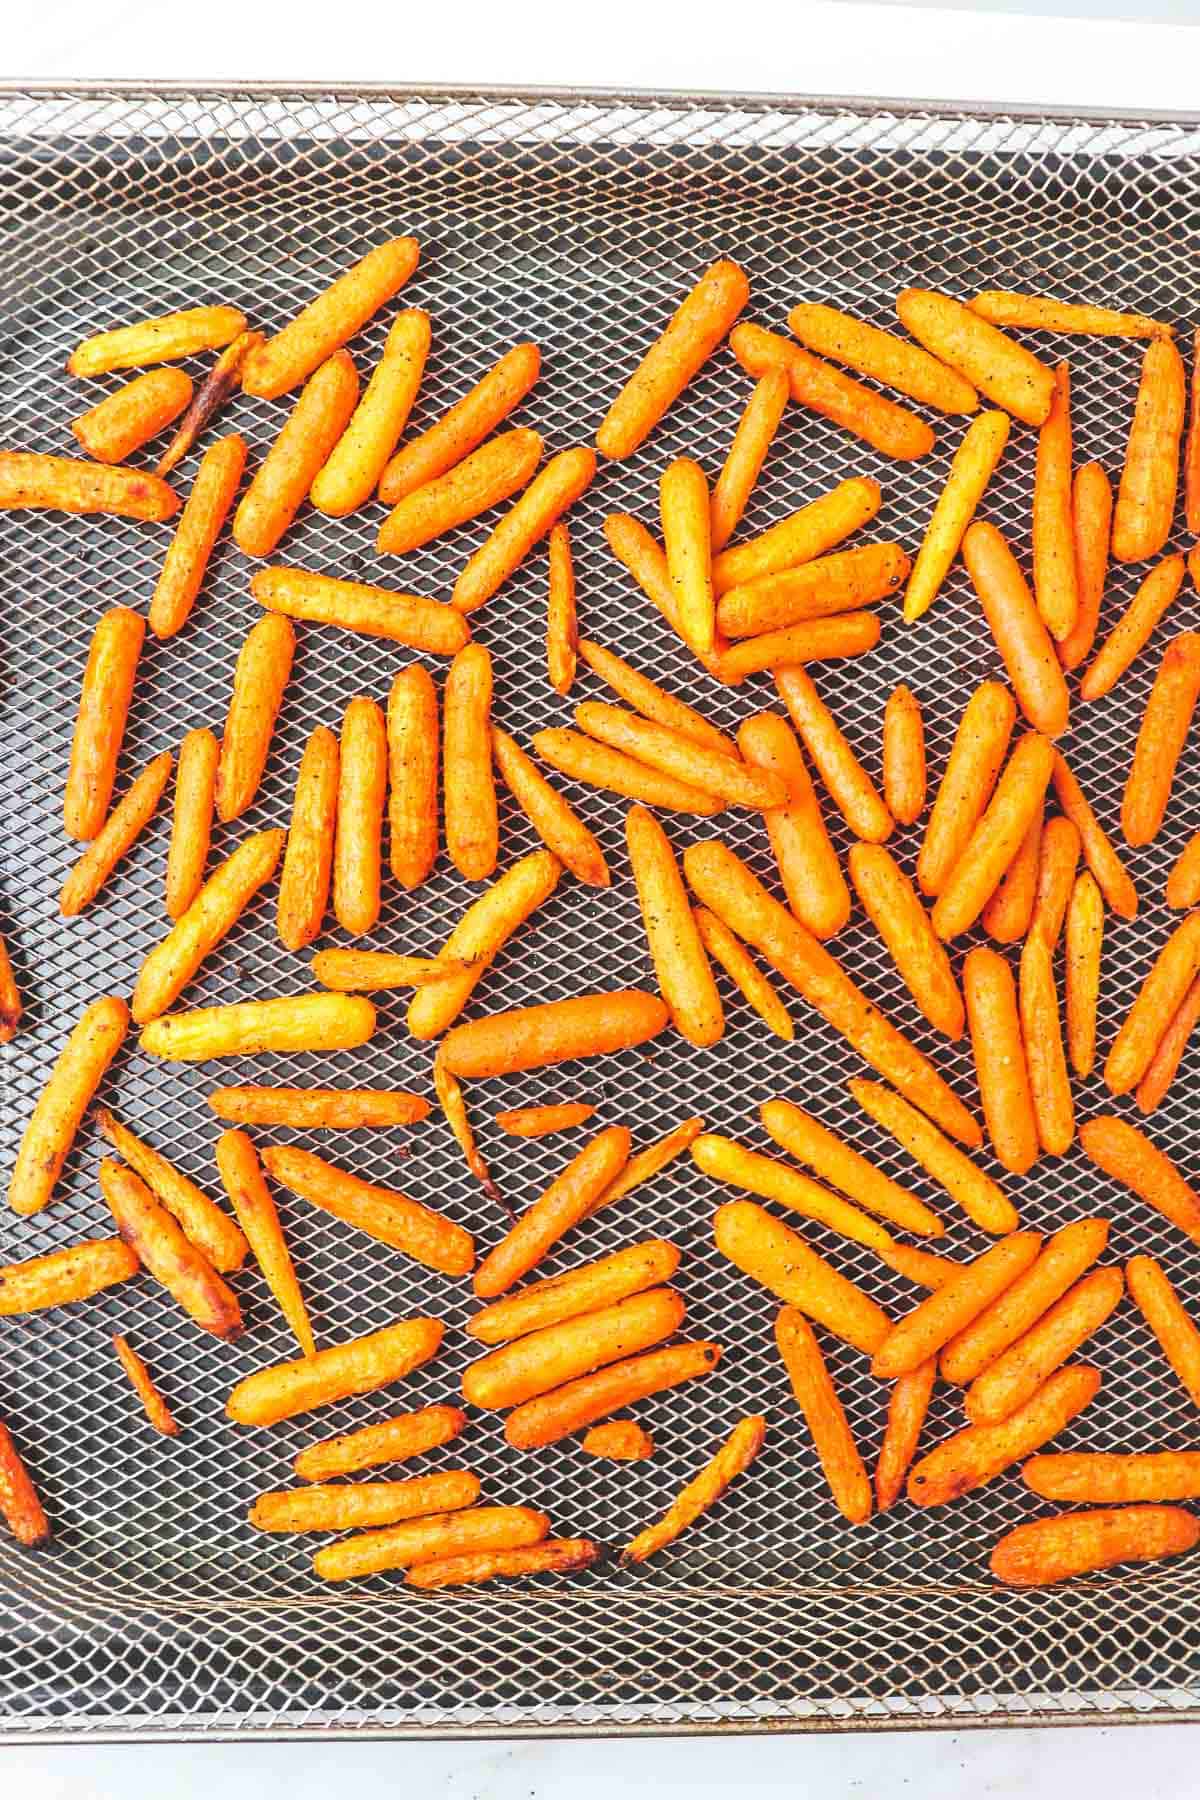 finished roasted carrots in air fryer basket